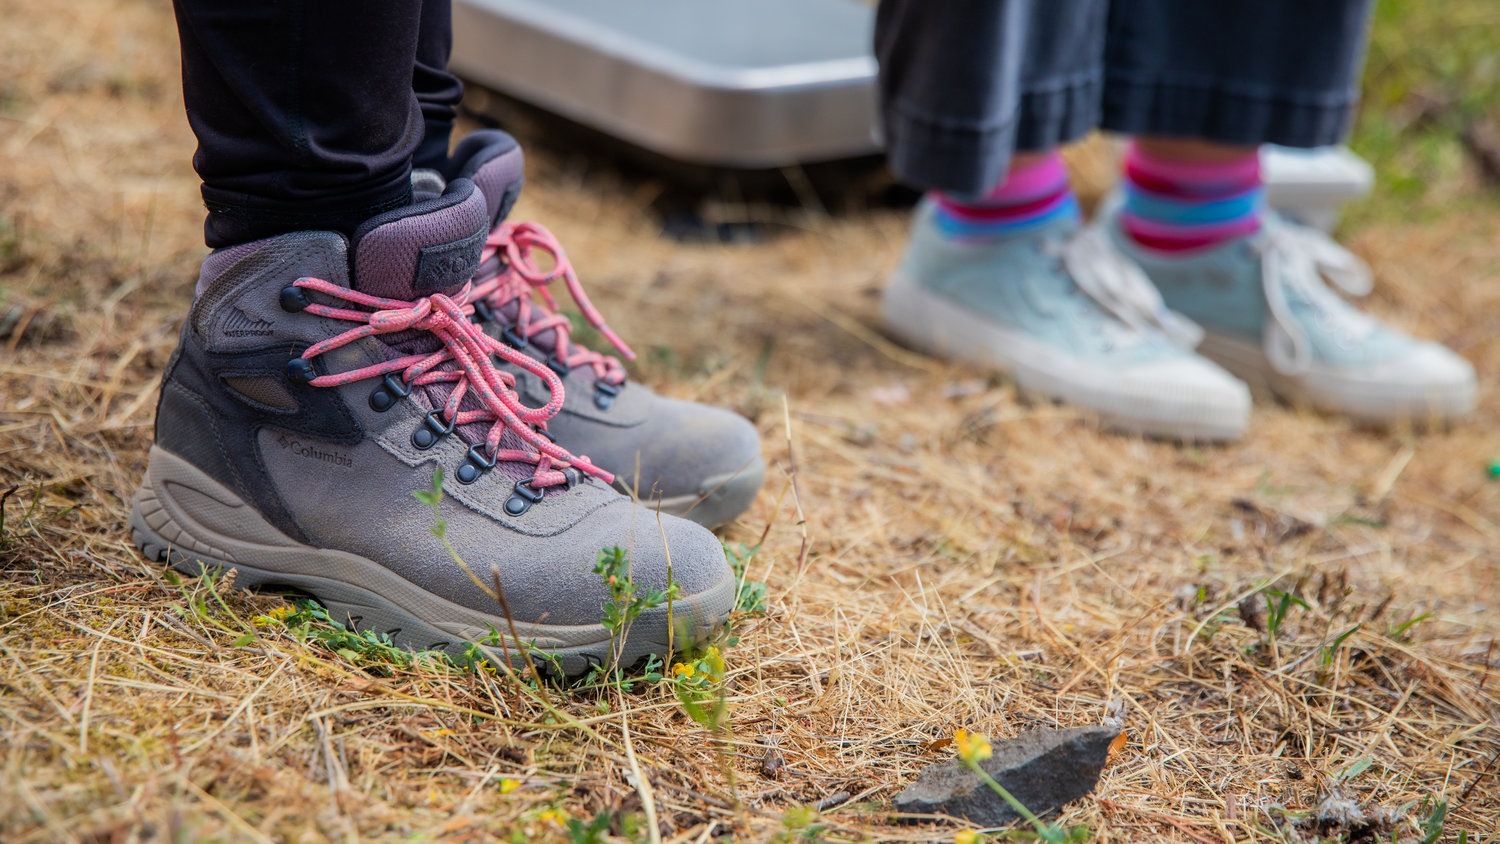 Boots laced in pink and colorful socks are seen on a hillside outside the Mount St. Helens Science and Learning Center at Coldwater as GeoGirls record seismic readings on the slopes.